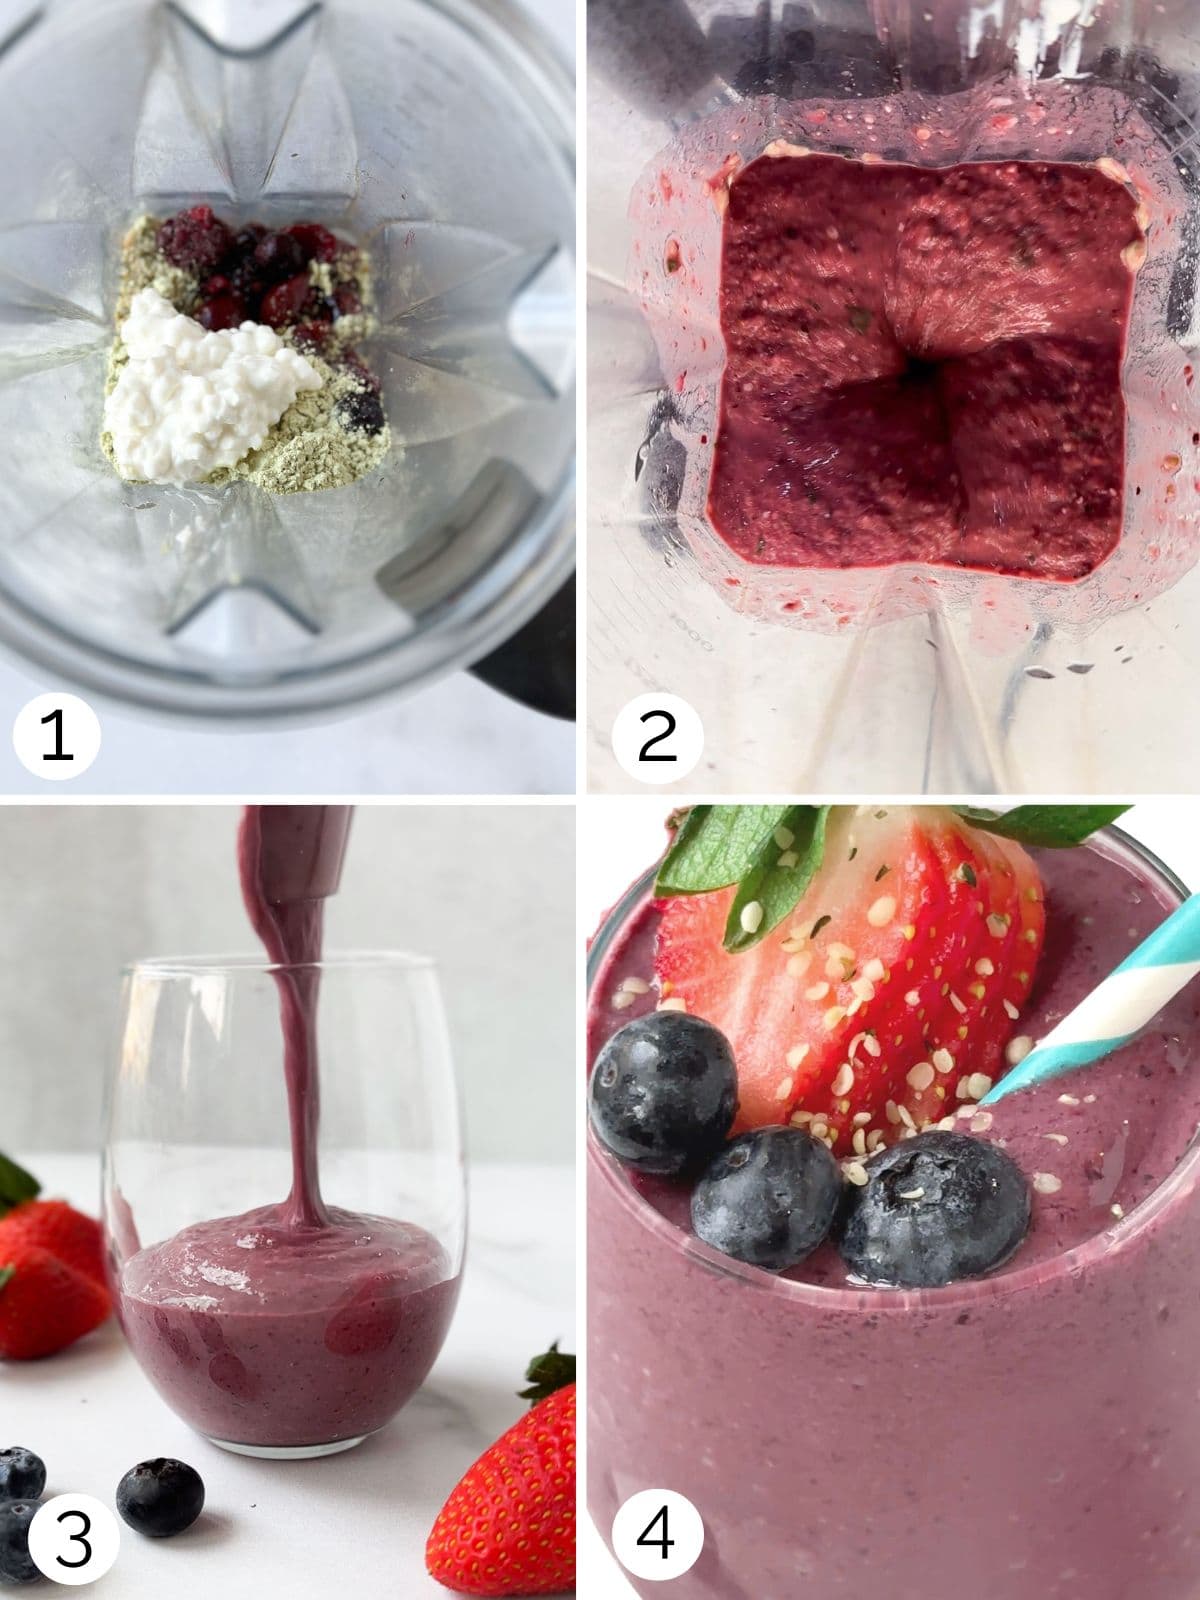 Step by step process for making berry smoothies.